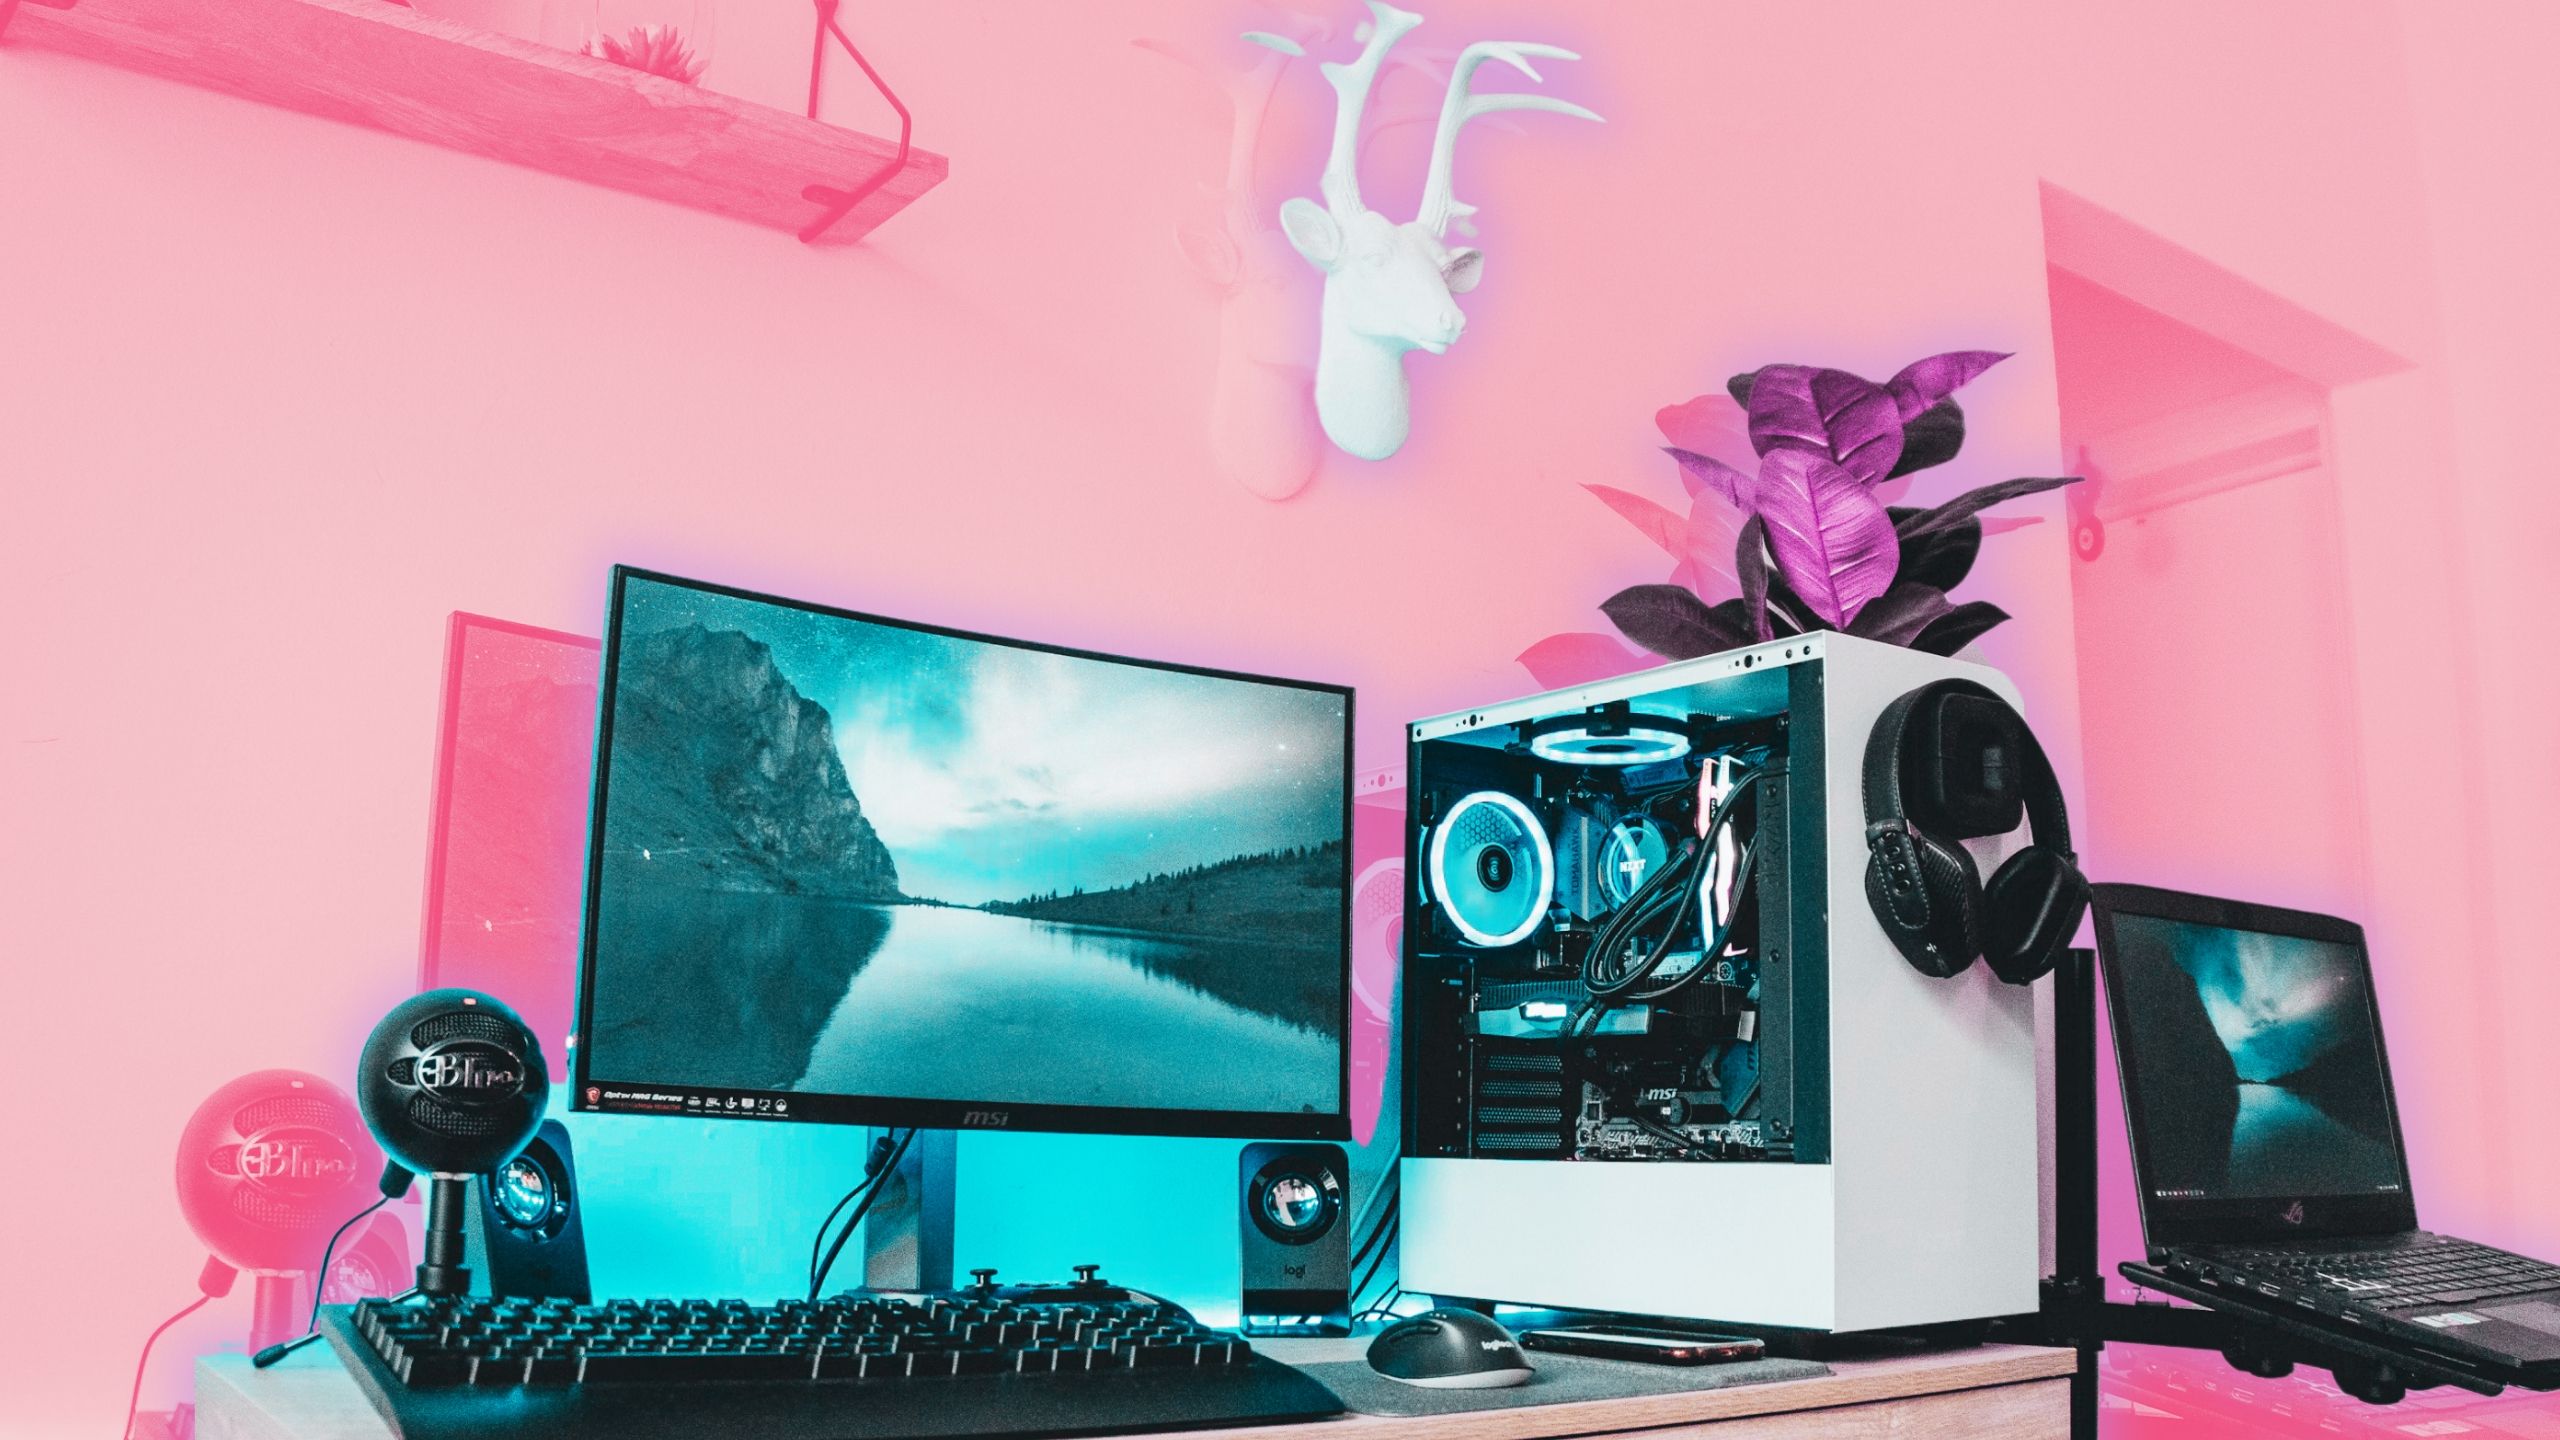 A PC gaming rig with a pink background